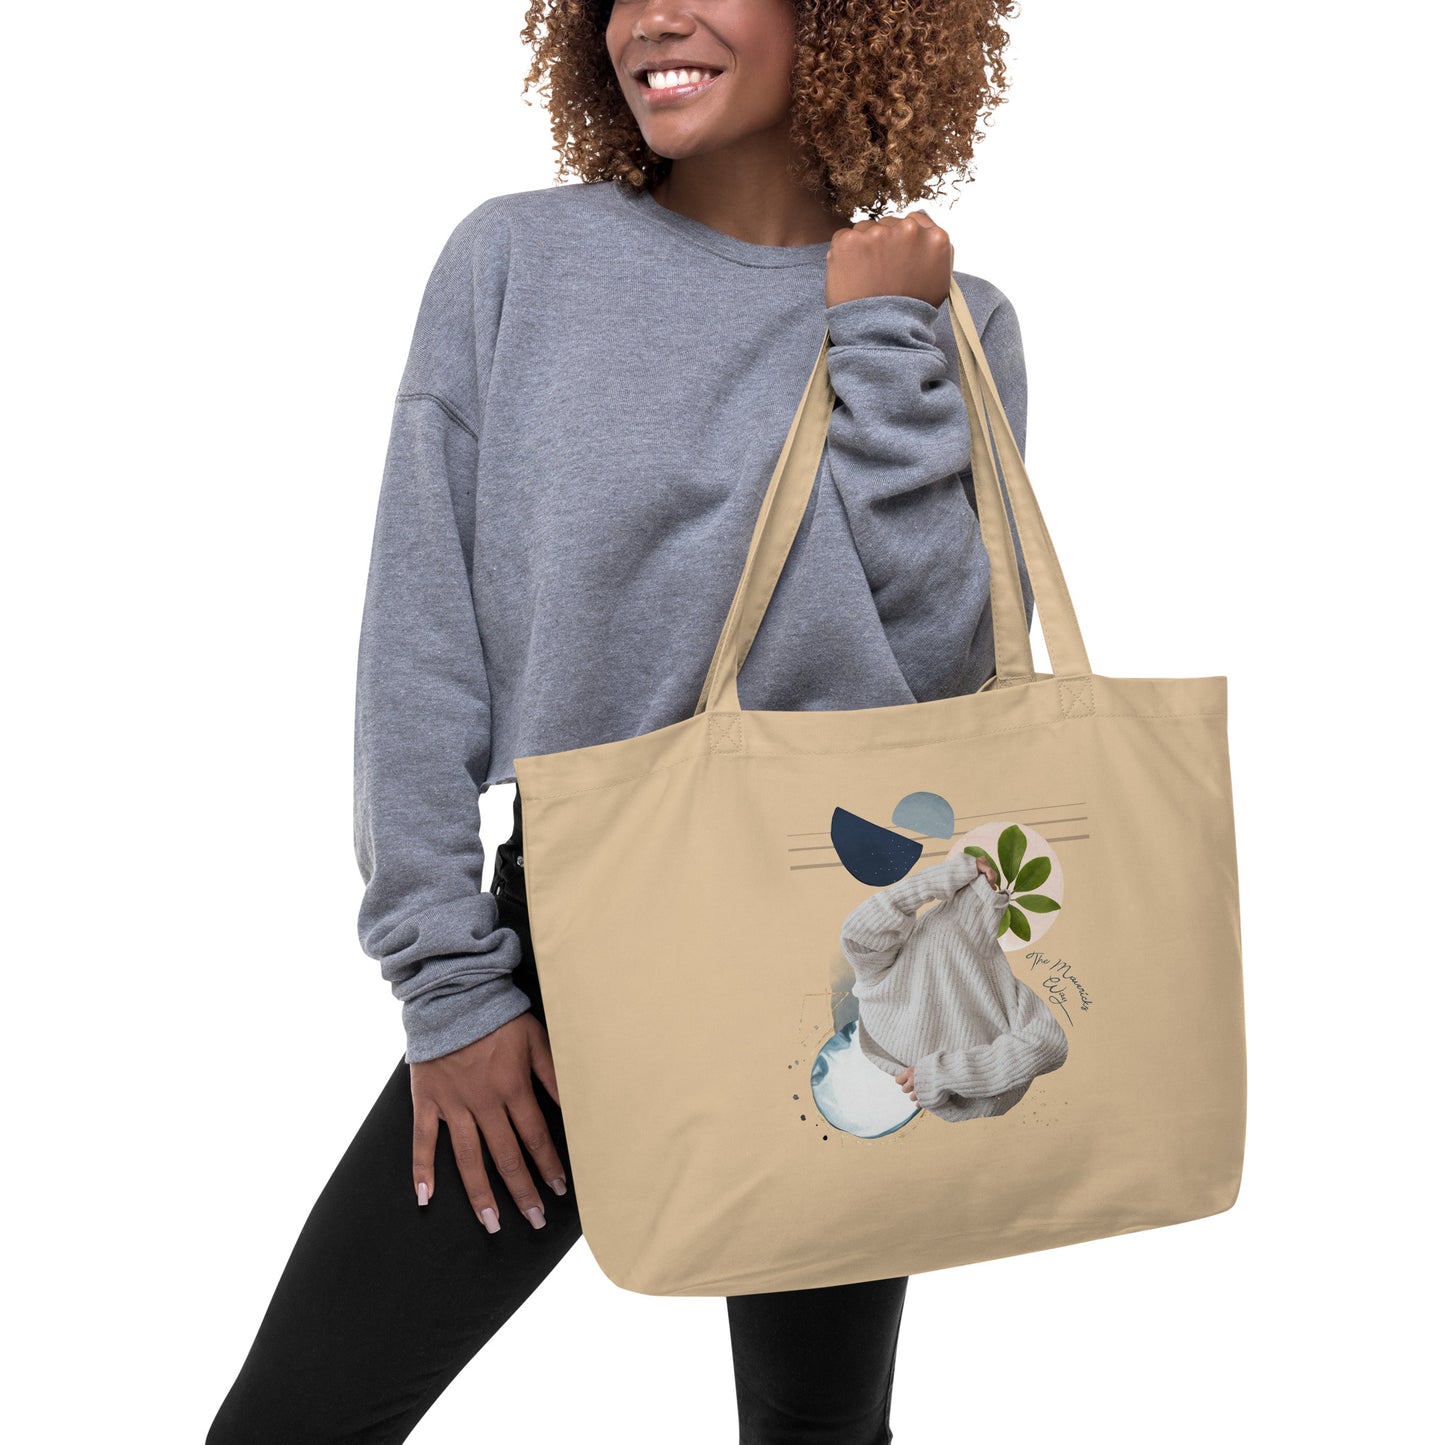 TIME FOR CHANGE Tote